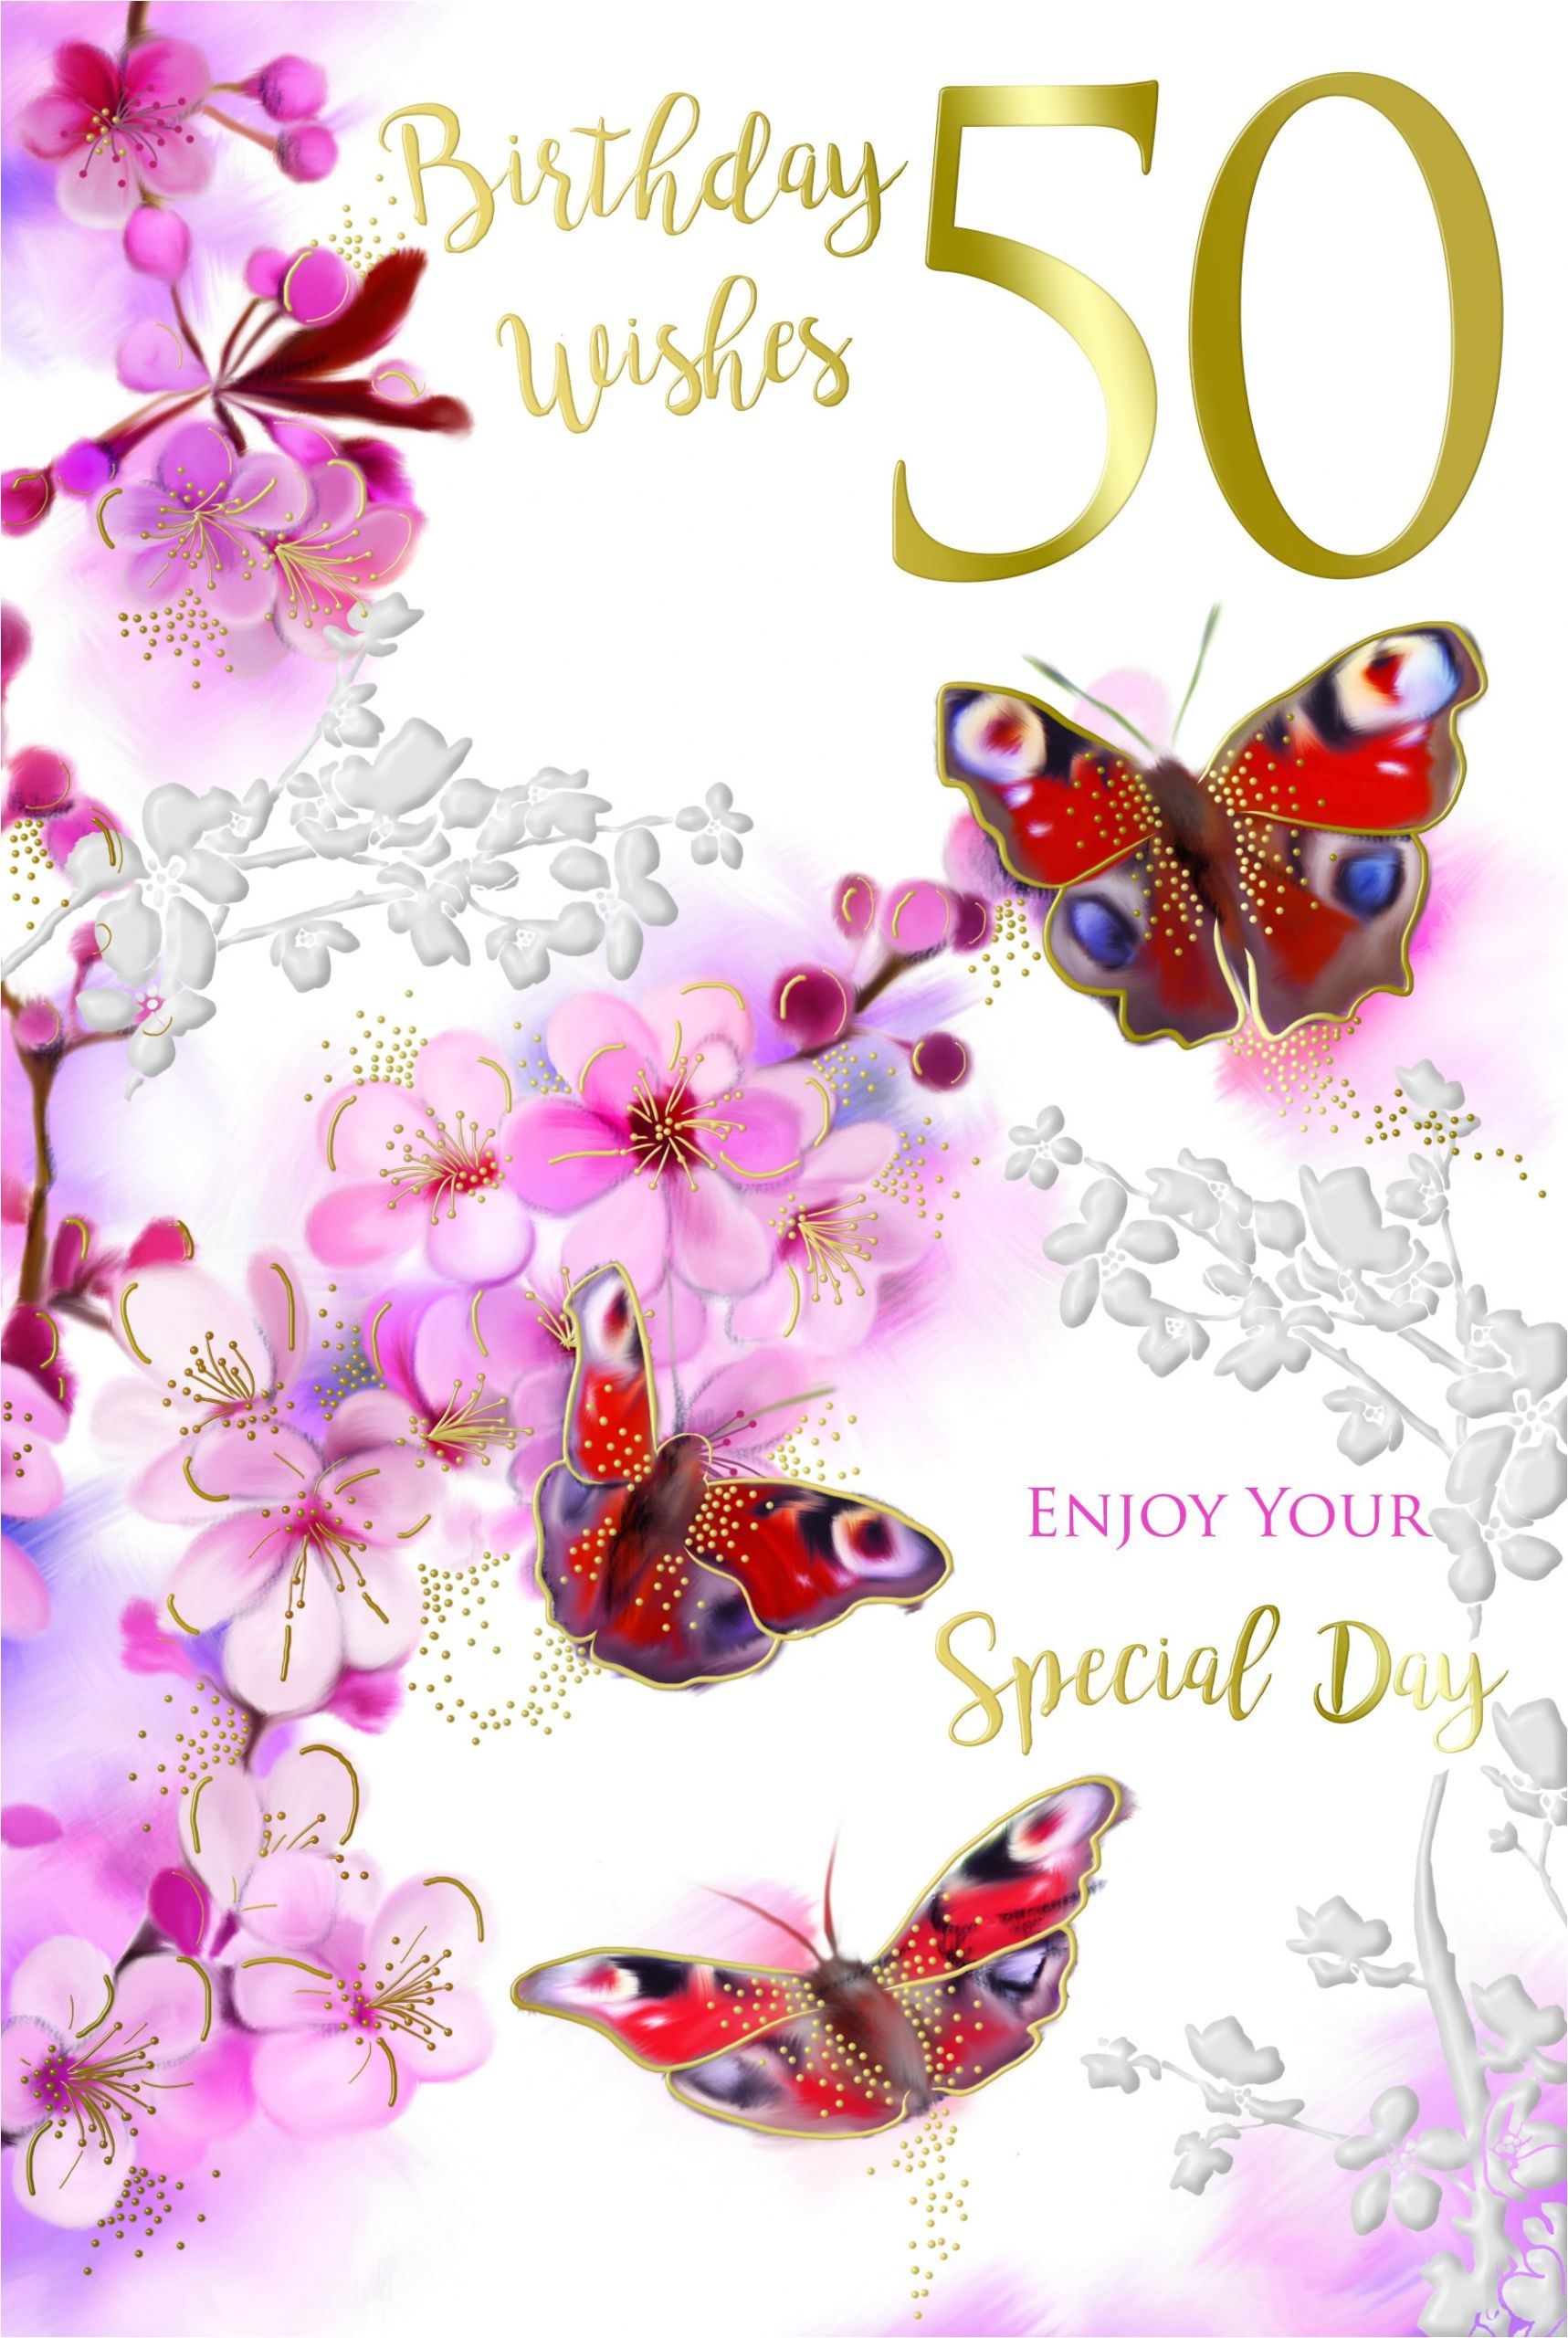 50th 50 special day bright flowers butterflies design happy birthday card jpg